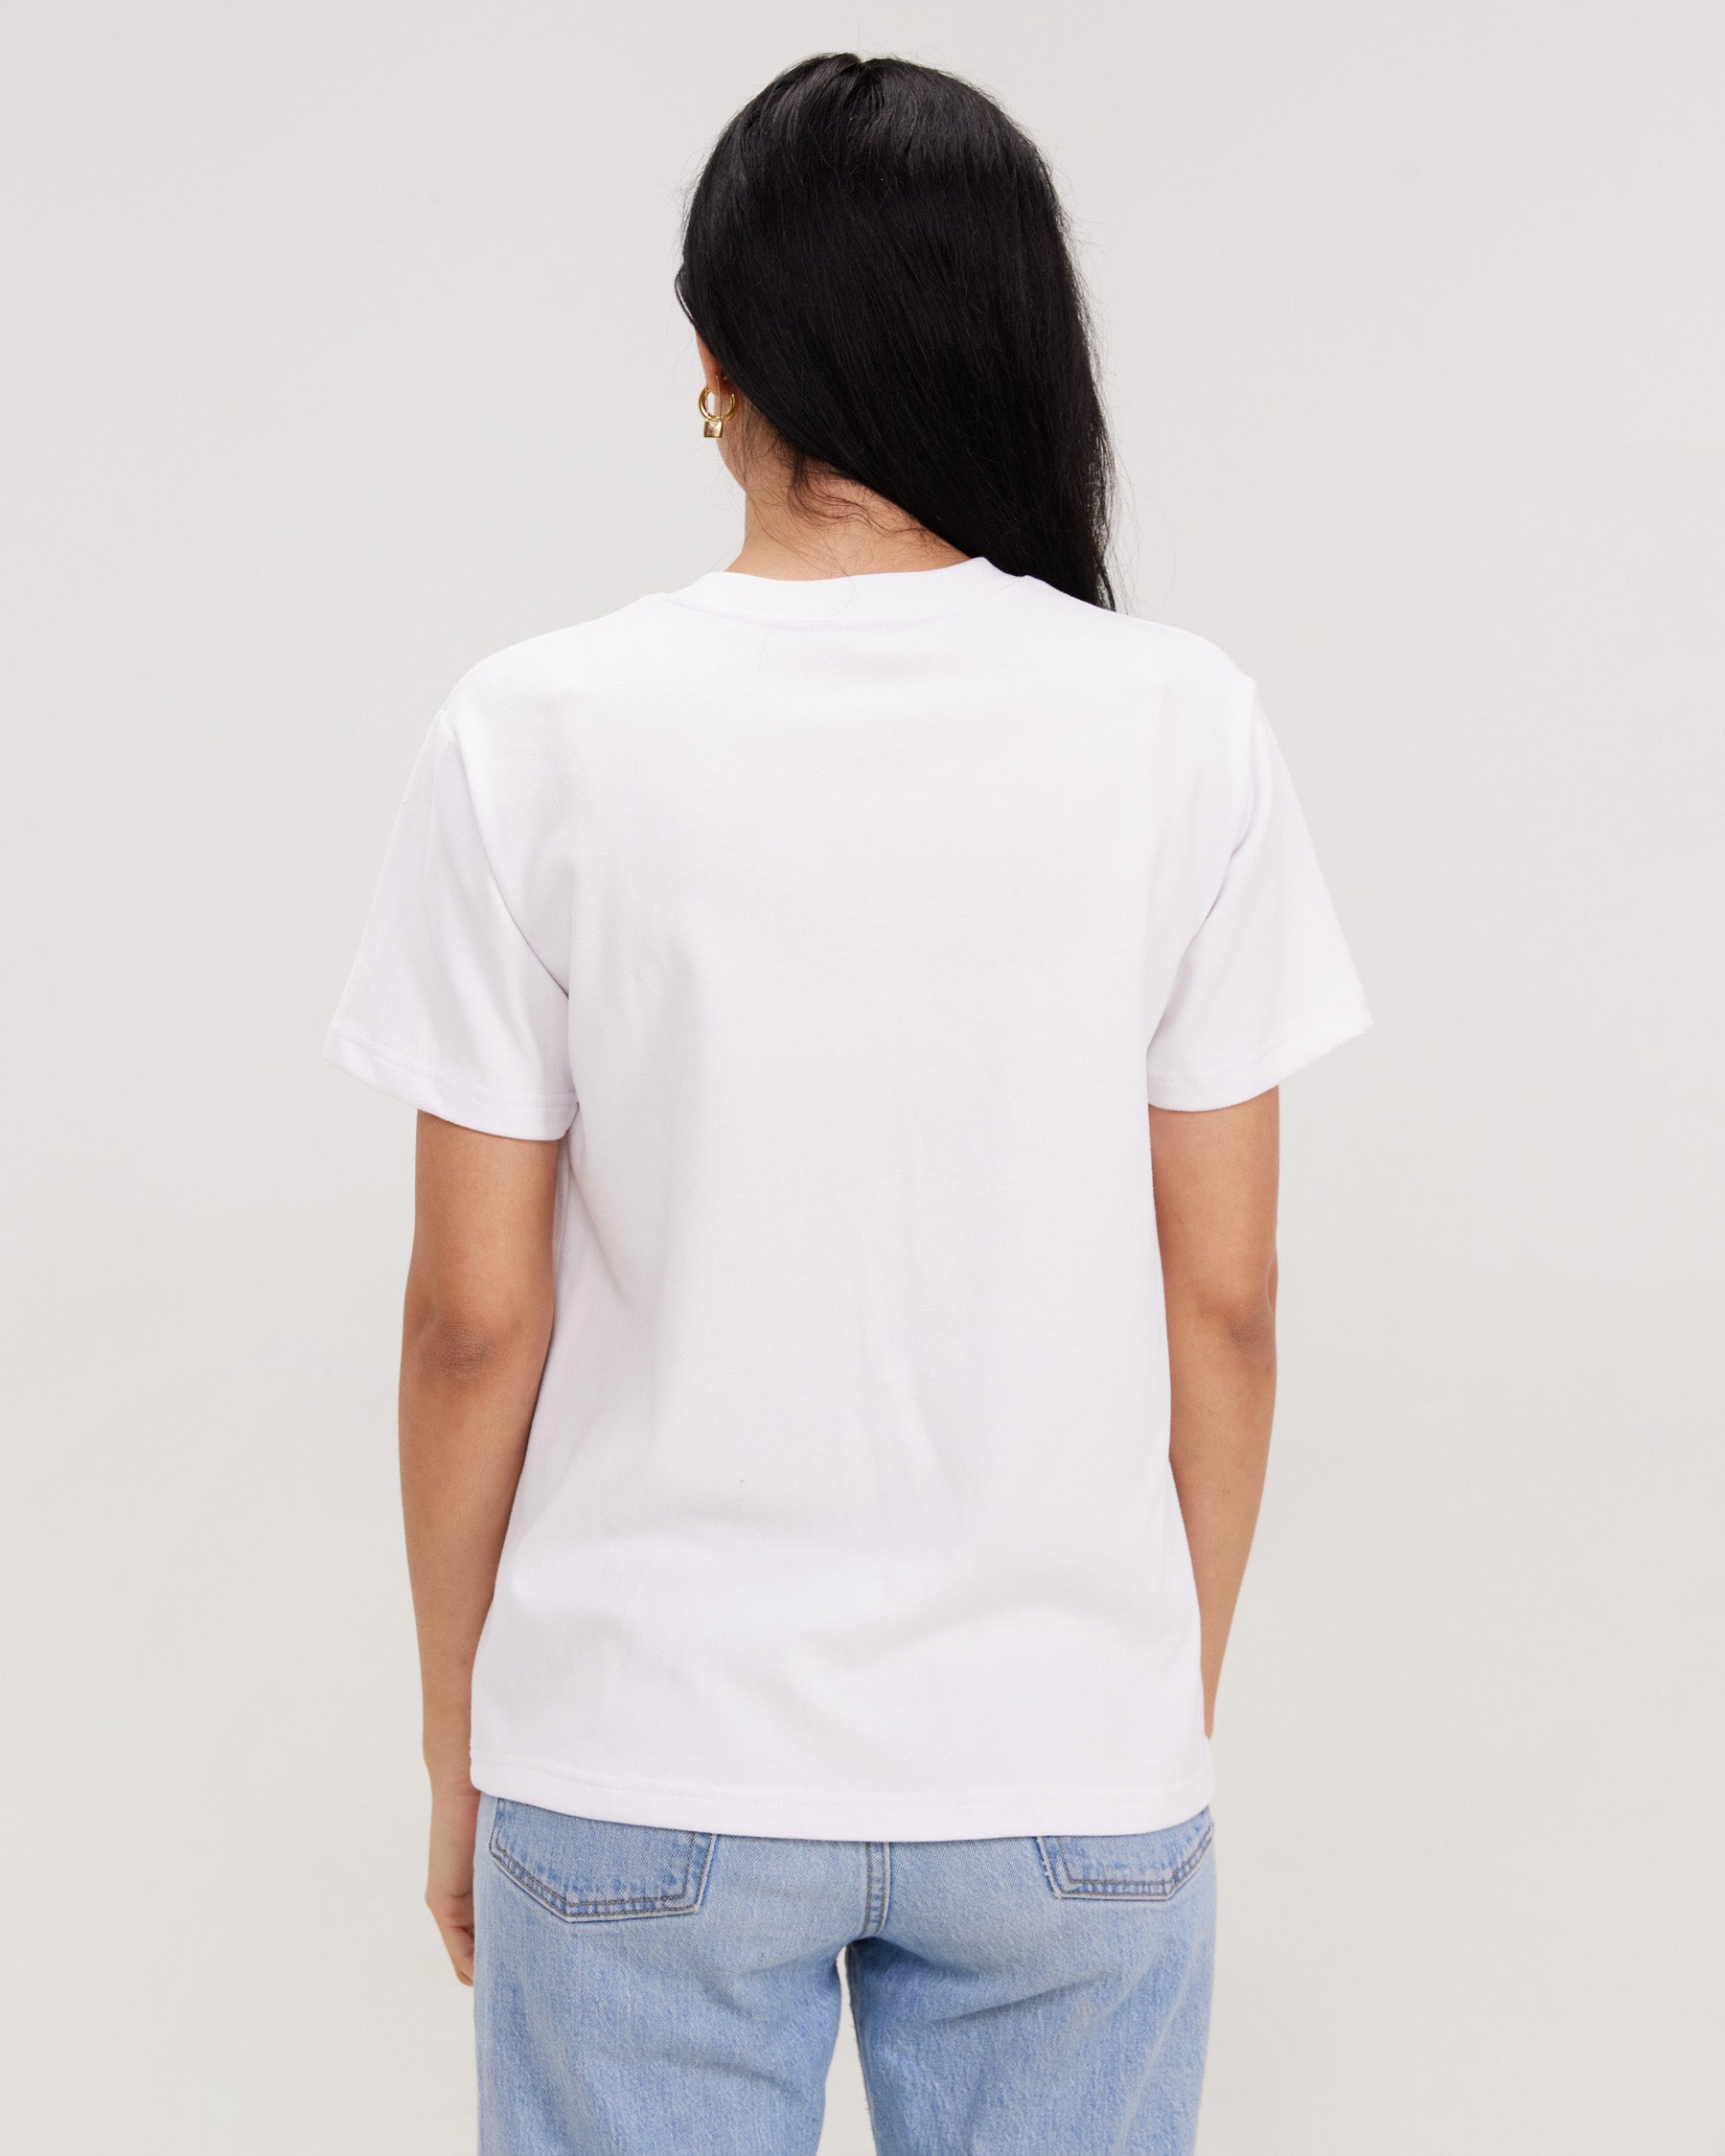 white t-shirt with fragile graphic and heart